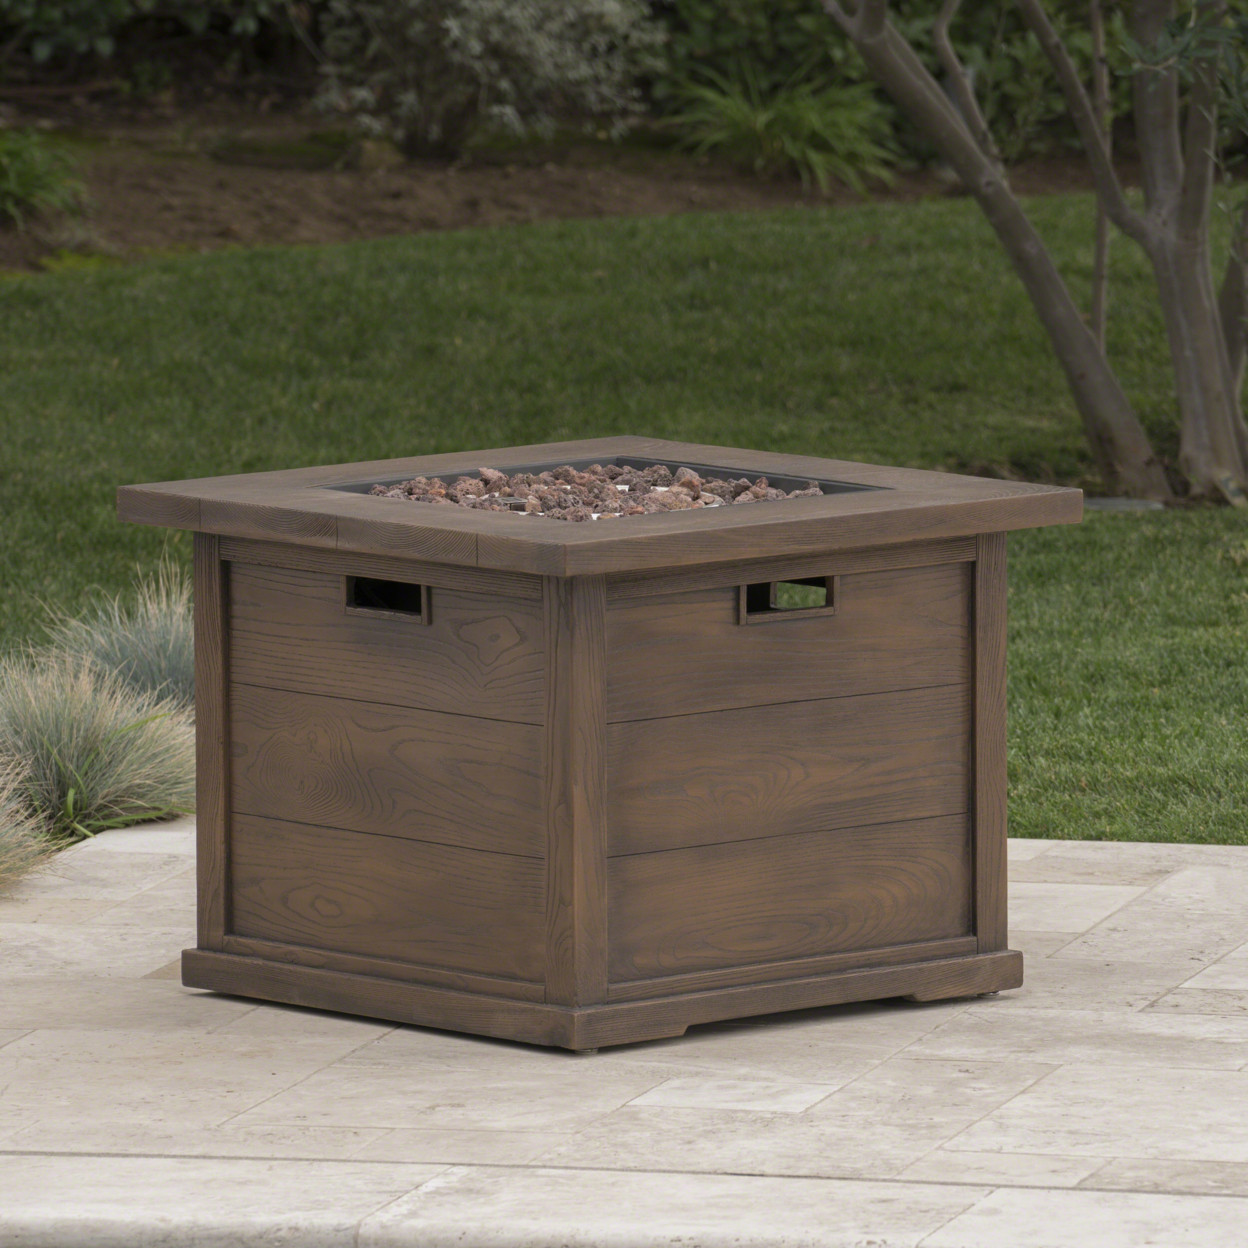 Ellesmere Outdoor Wood Patterned Square Gas Fire Pit - Brown Wood Pattern